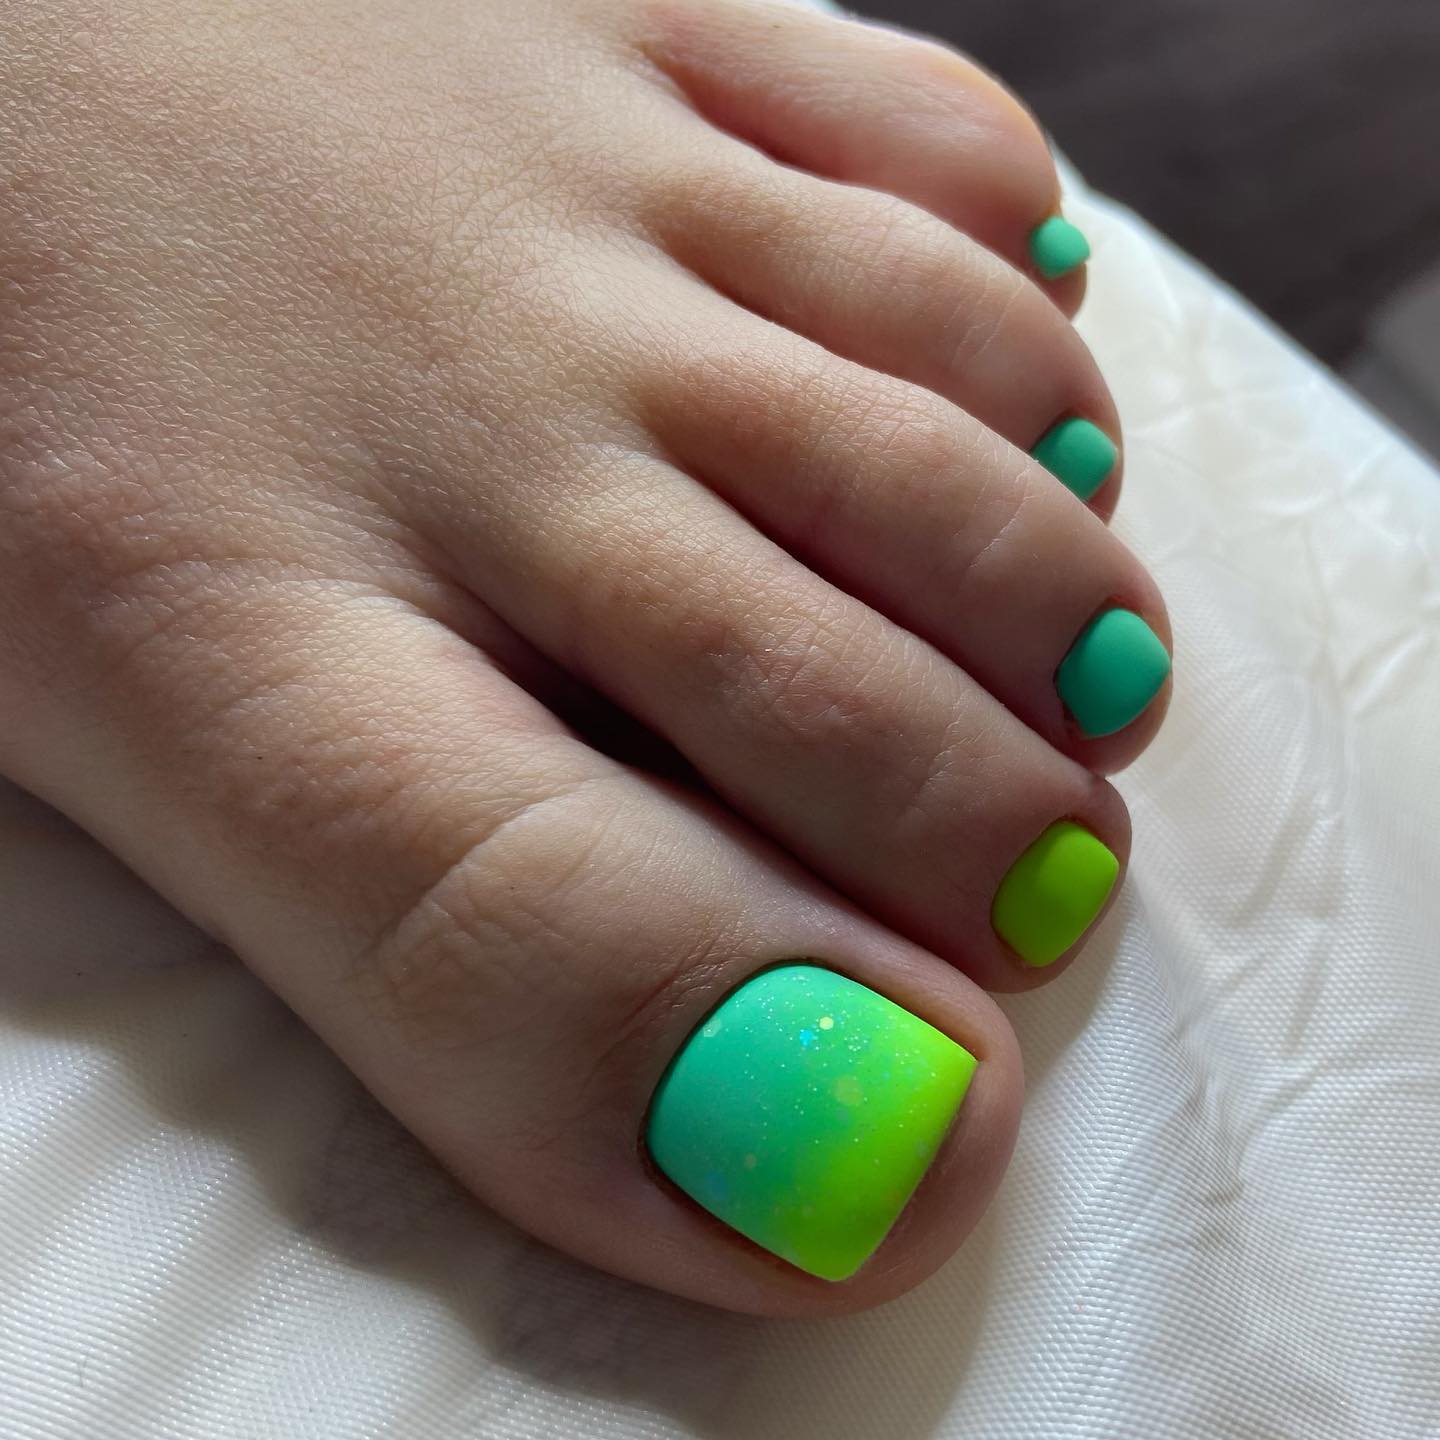 Green-to-Light Green Ombre Toe Nails